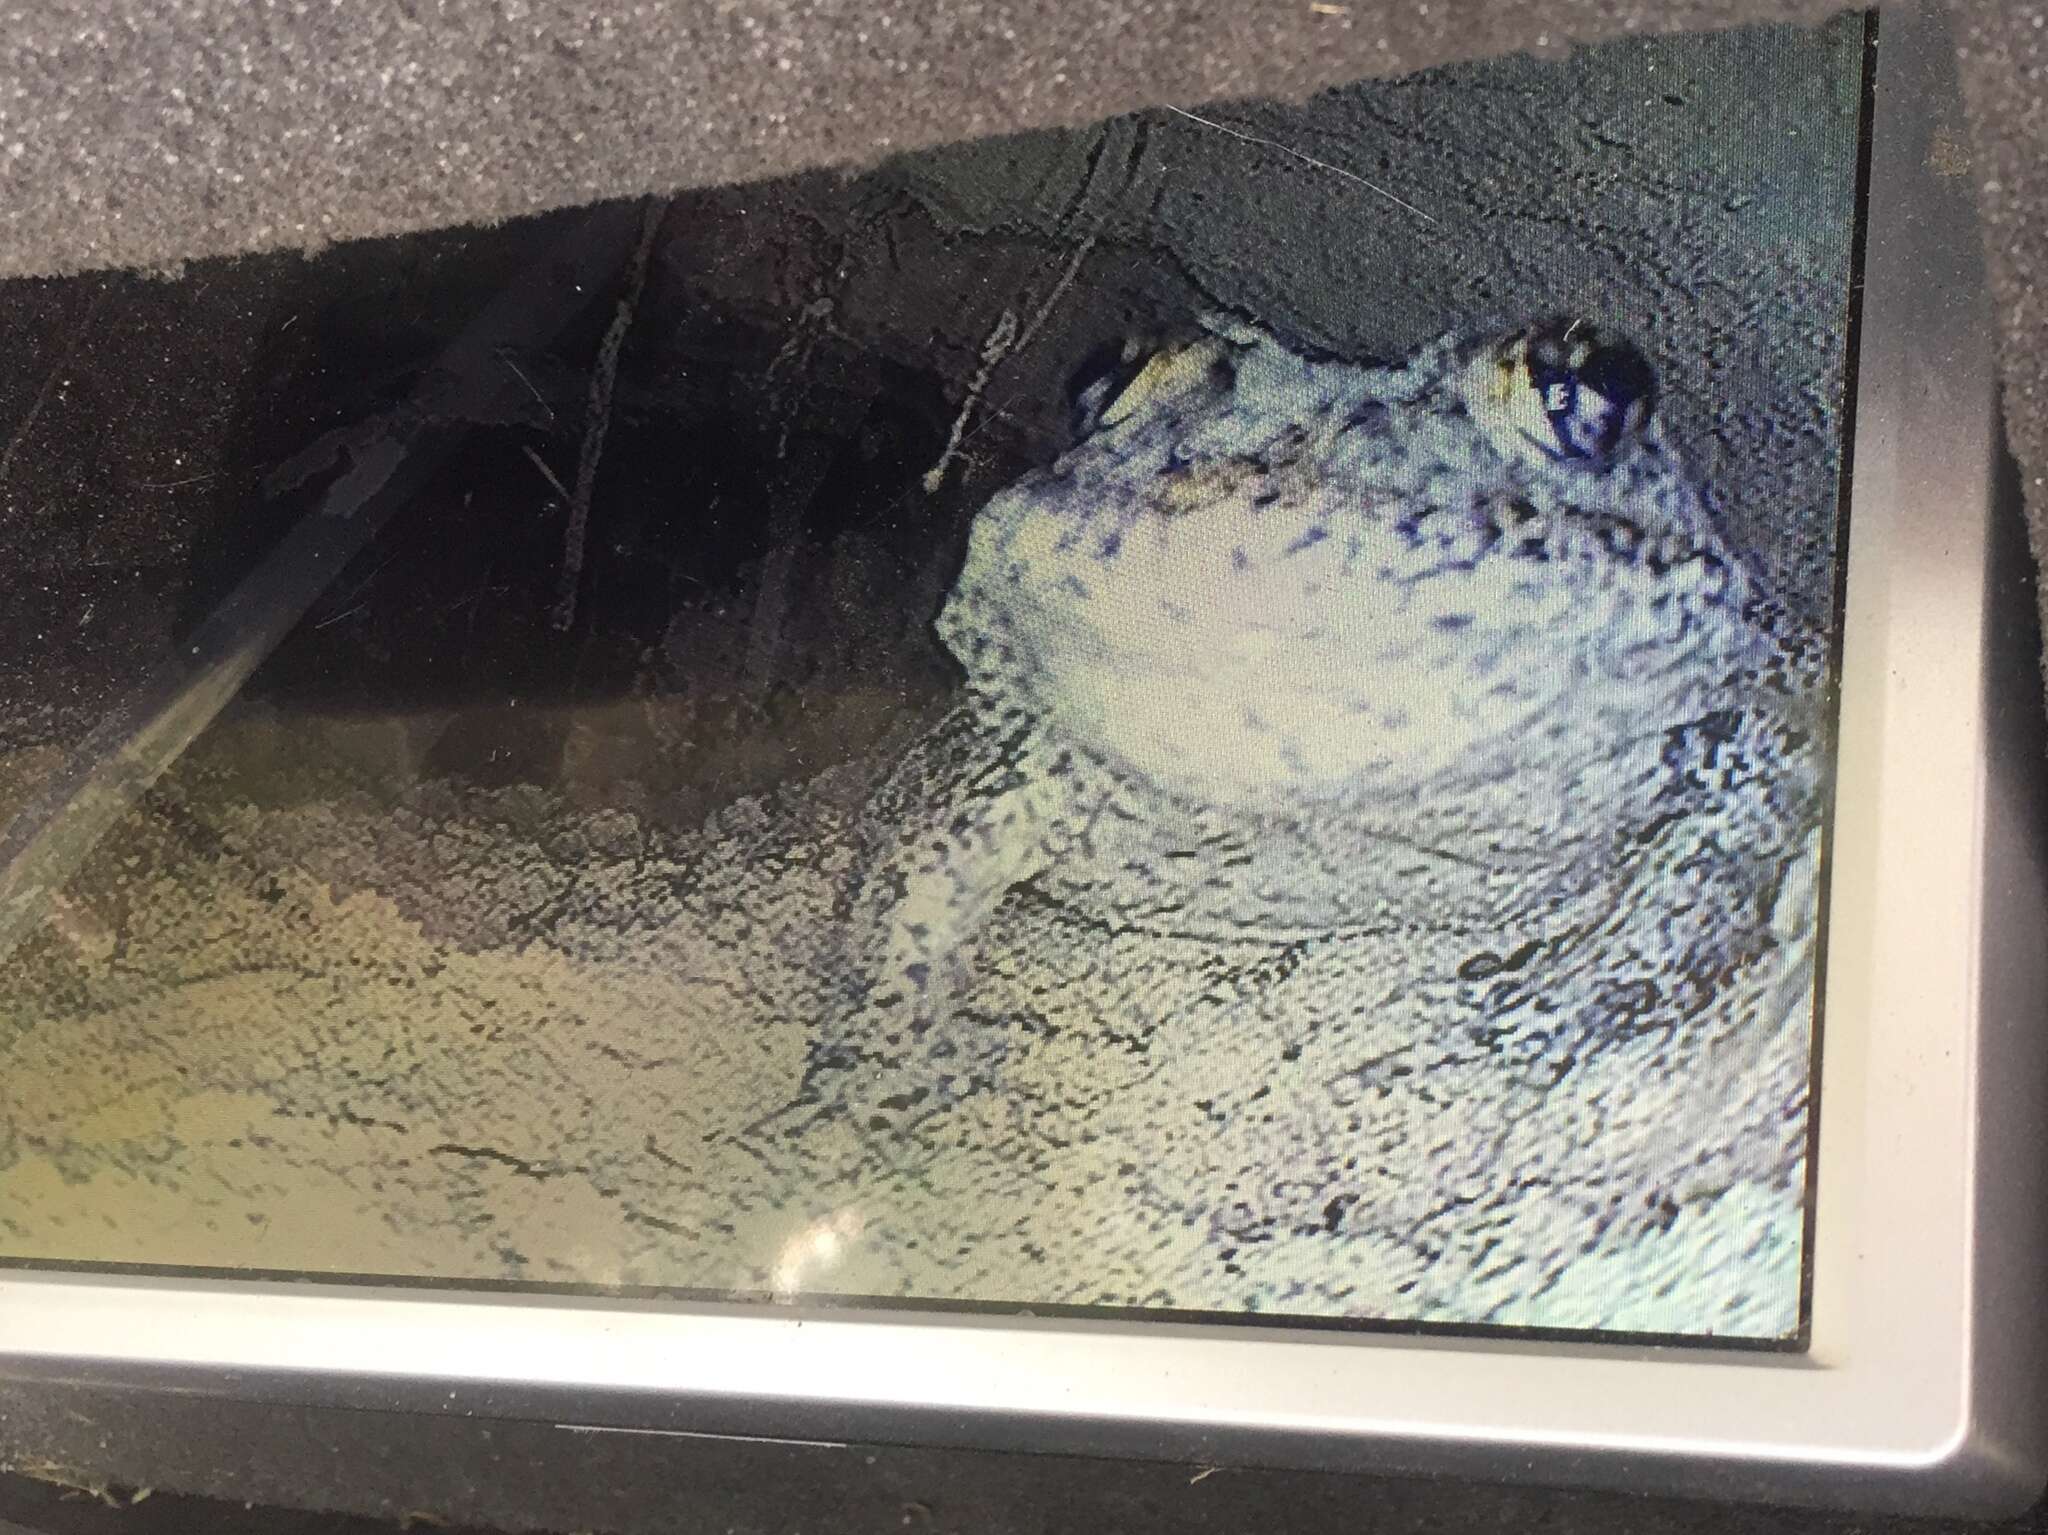 Image of Gopher Frog